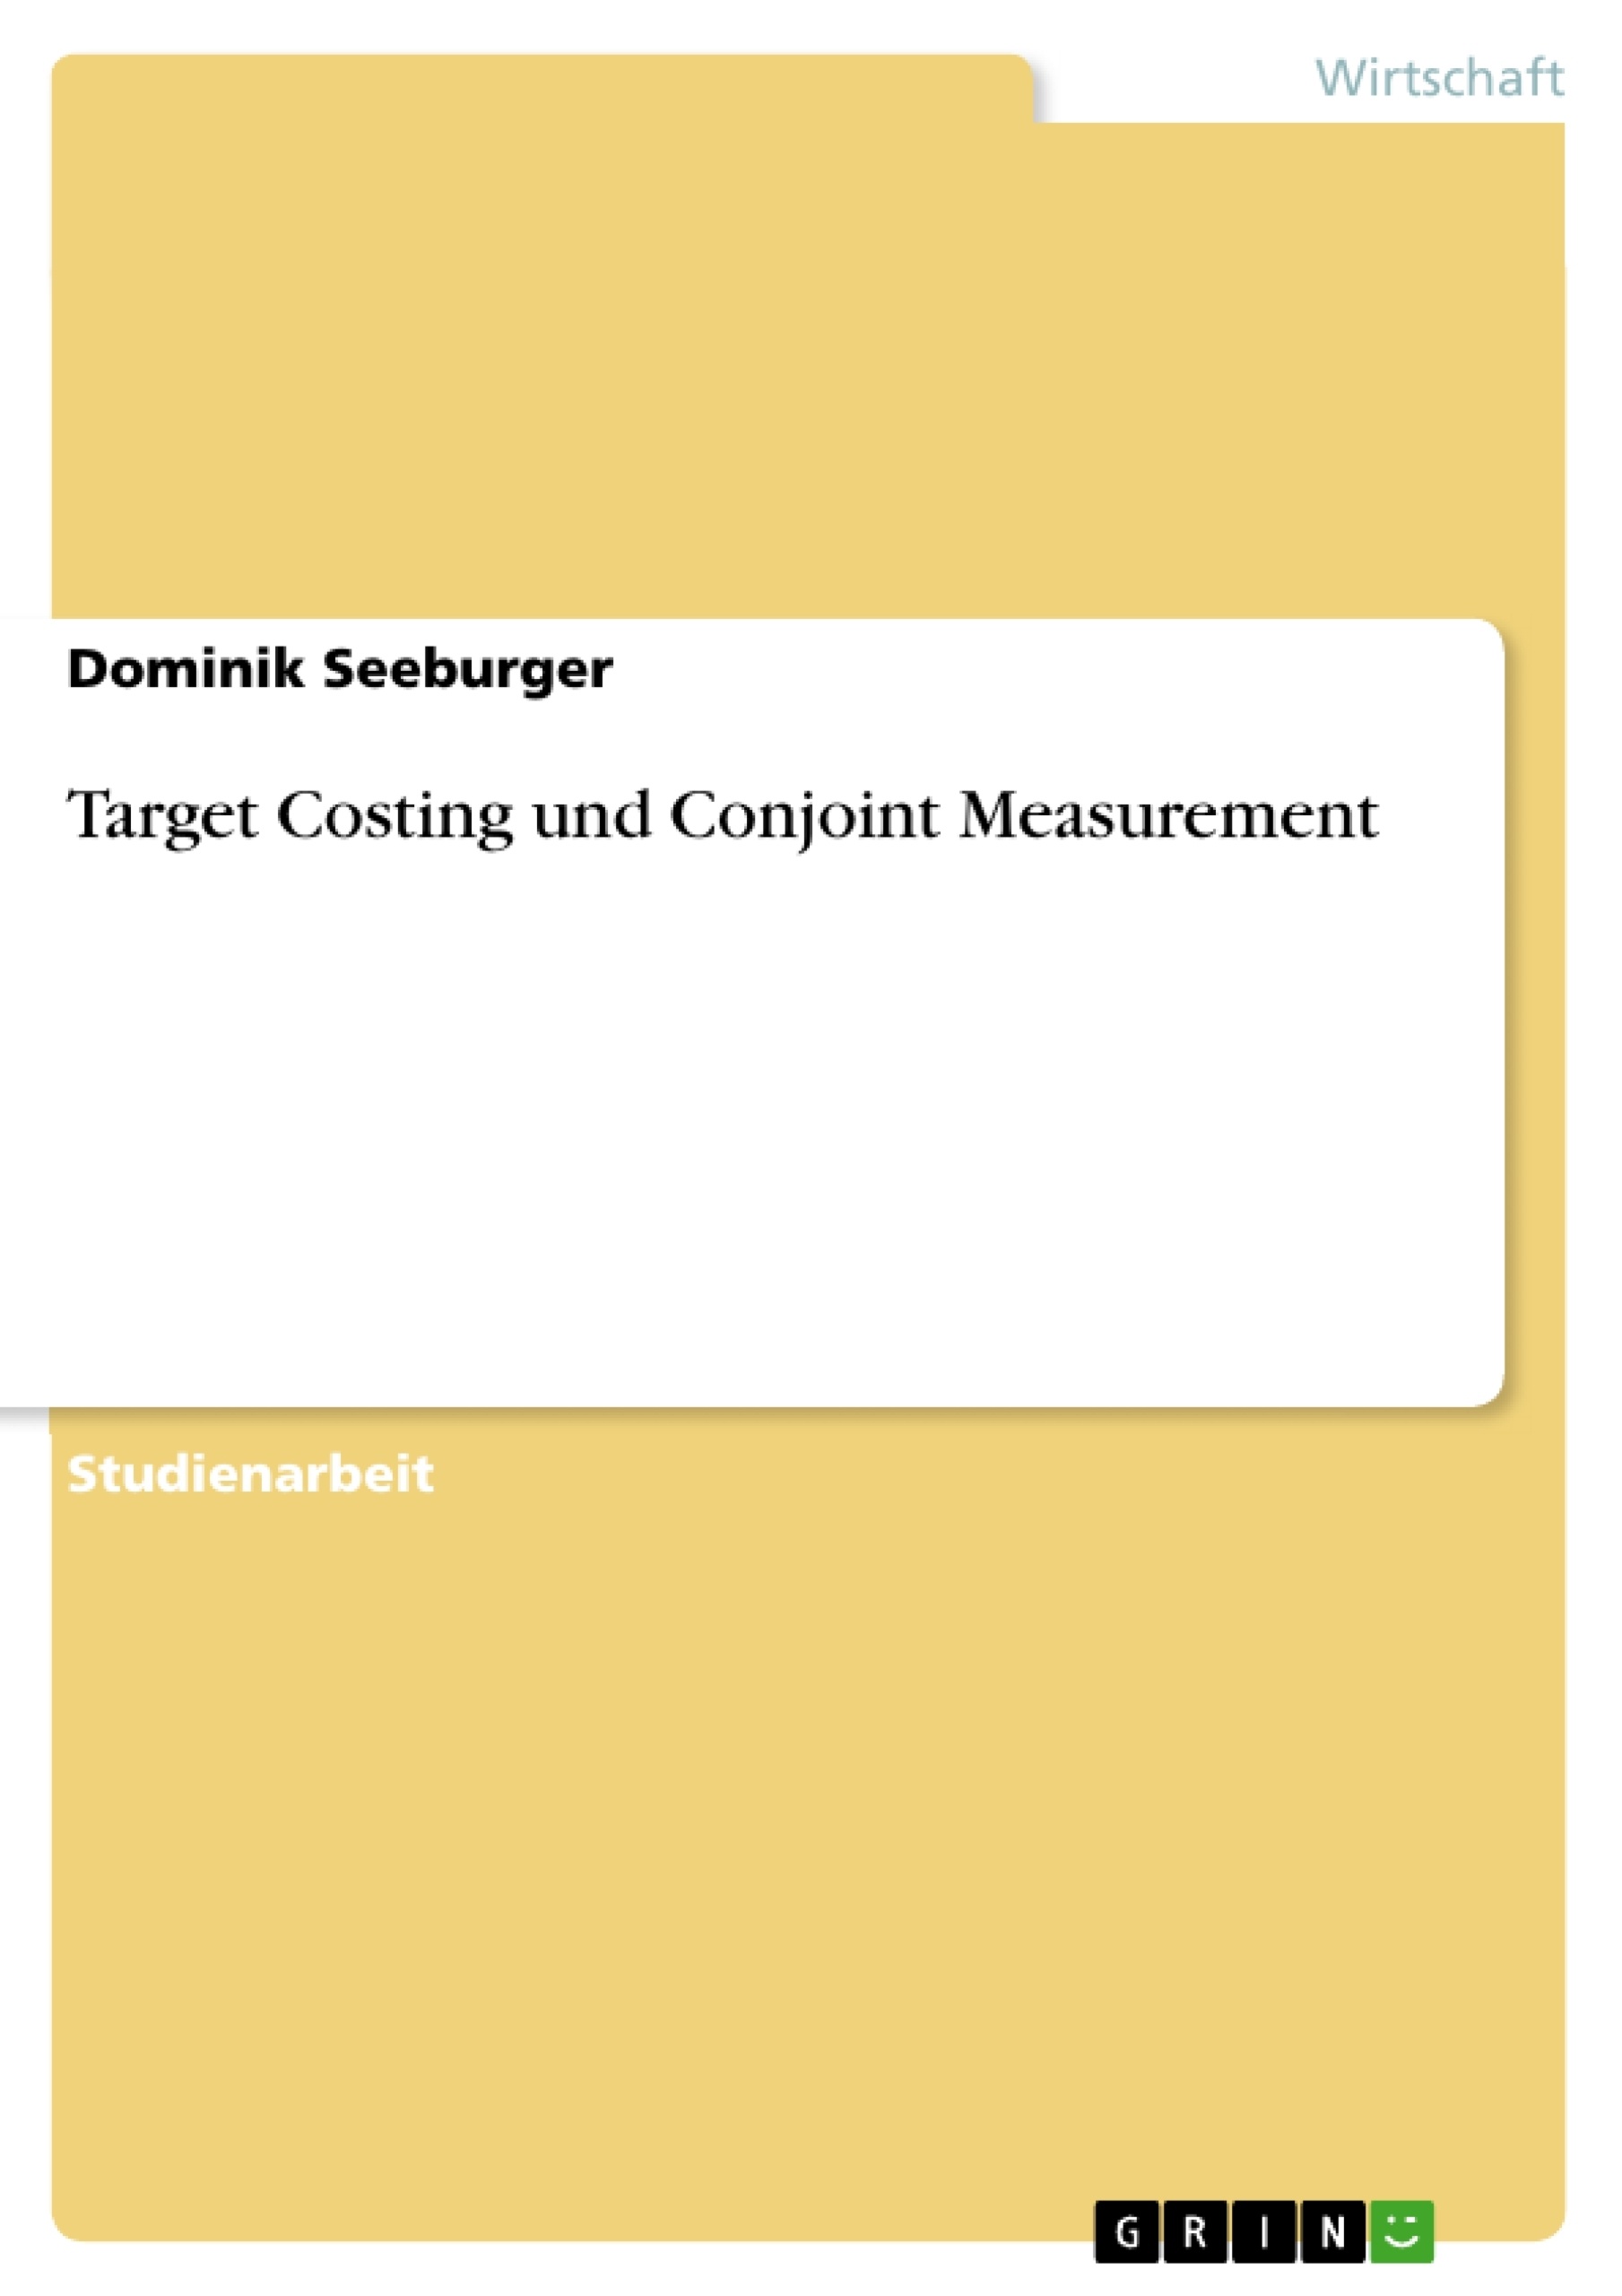 Título: Target Costing und Conjoint Measurement